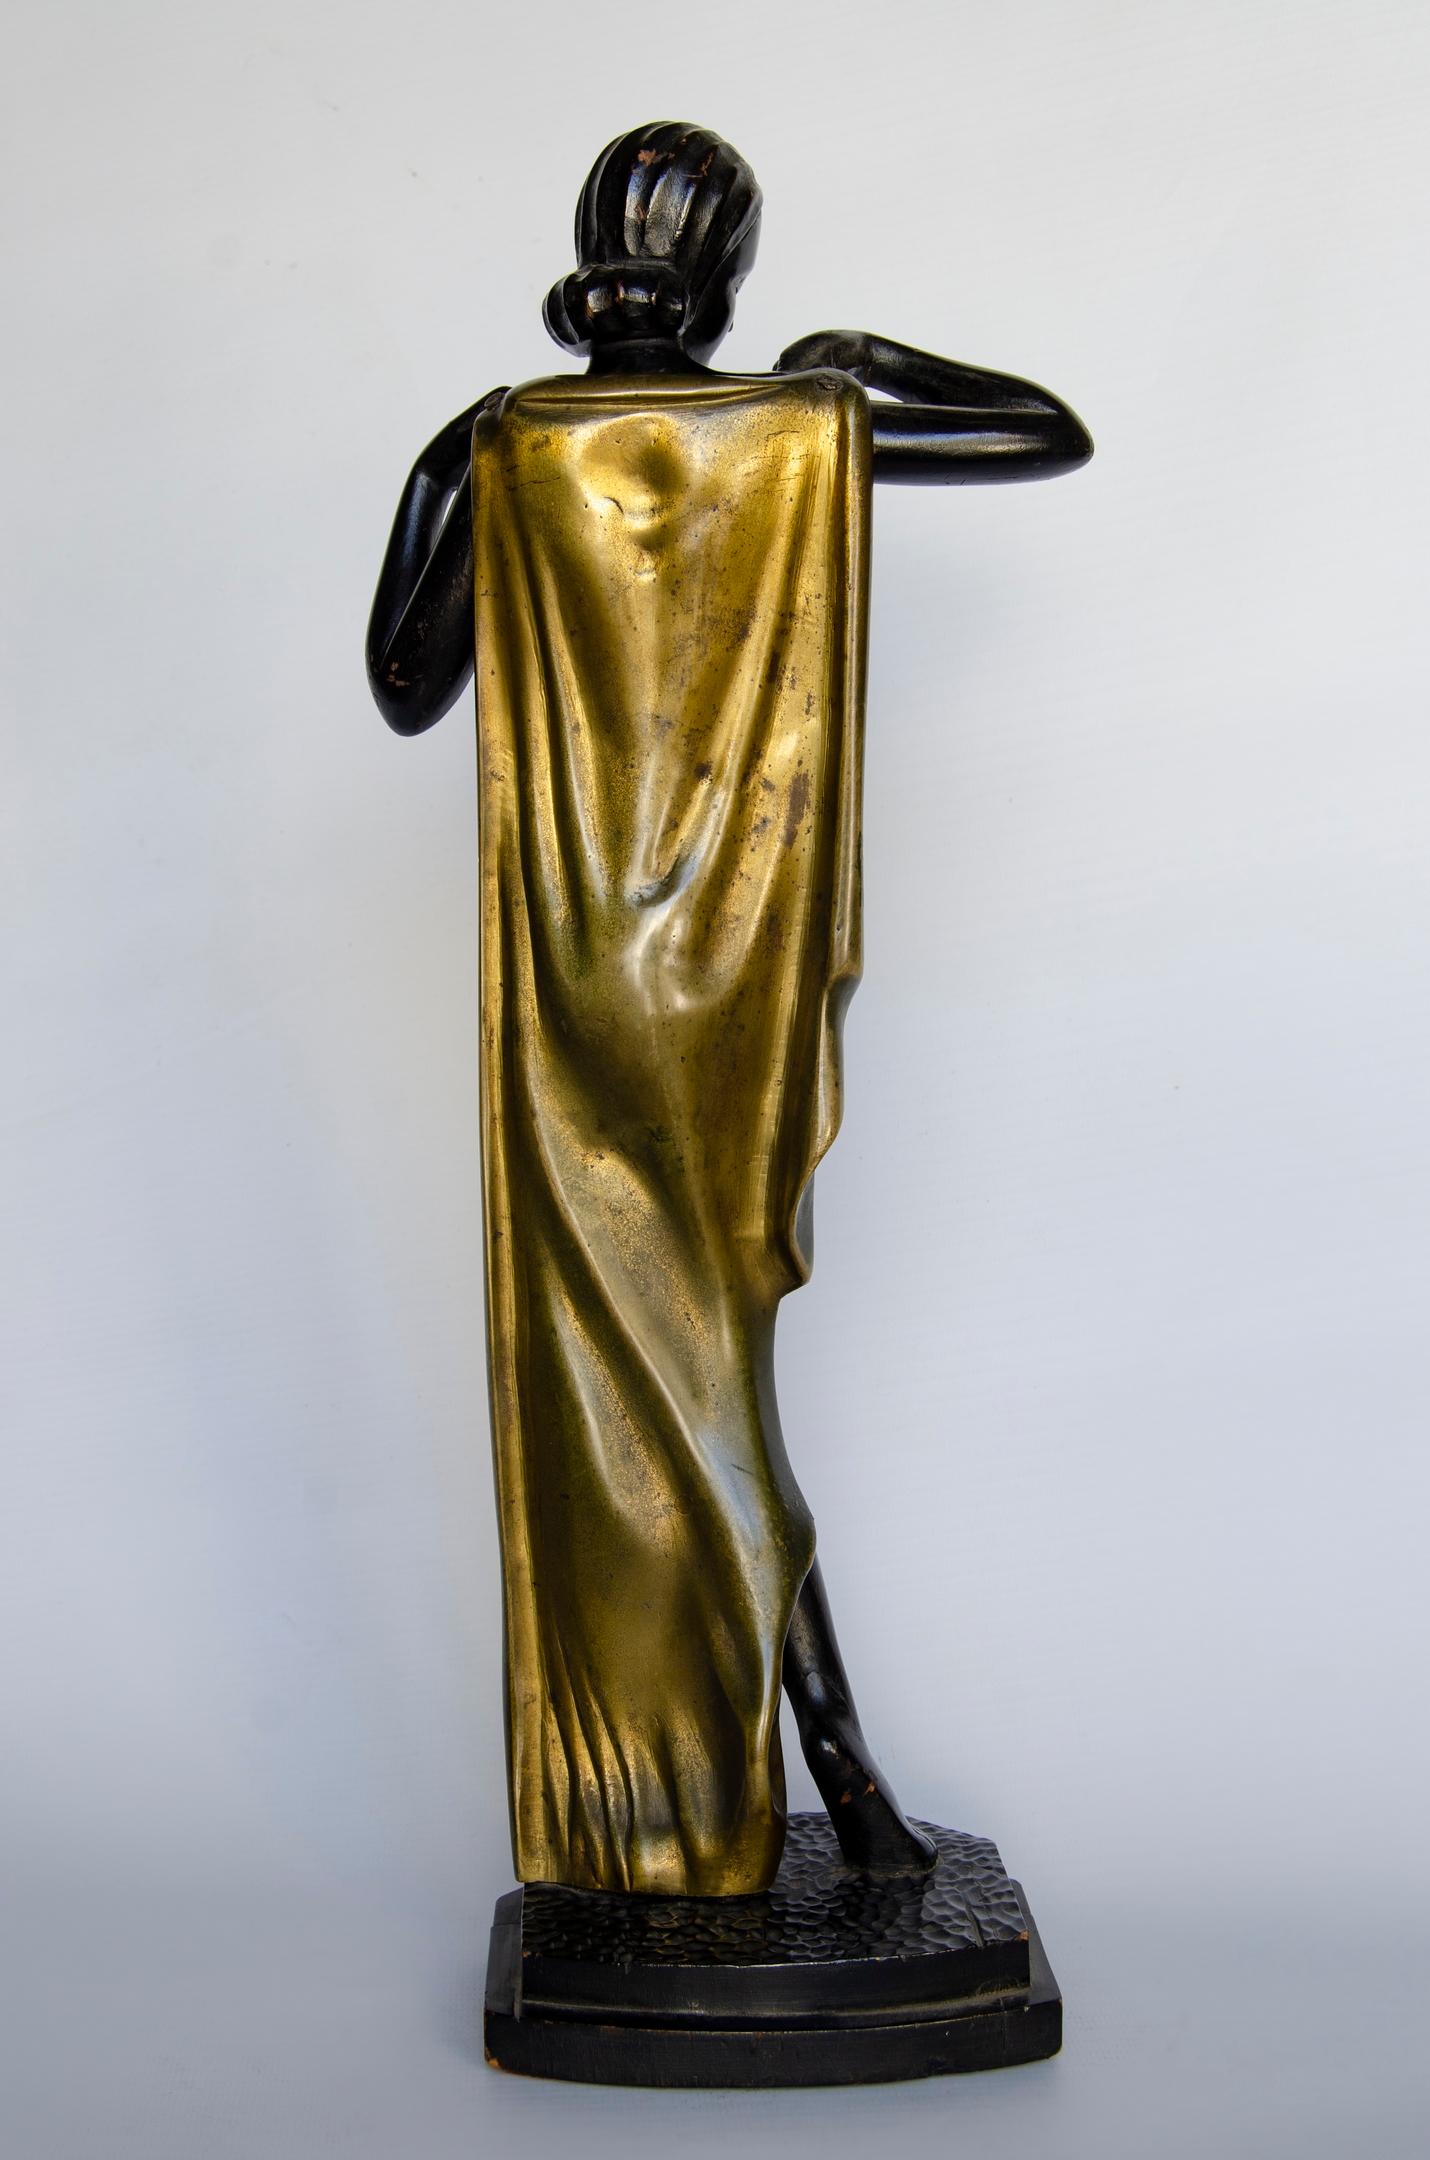 Art Deco France woman figure
wooden body and bronze mantle
without signature Origin France, circa 1930
some natural wear.